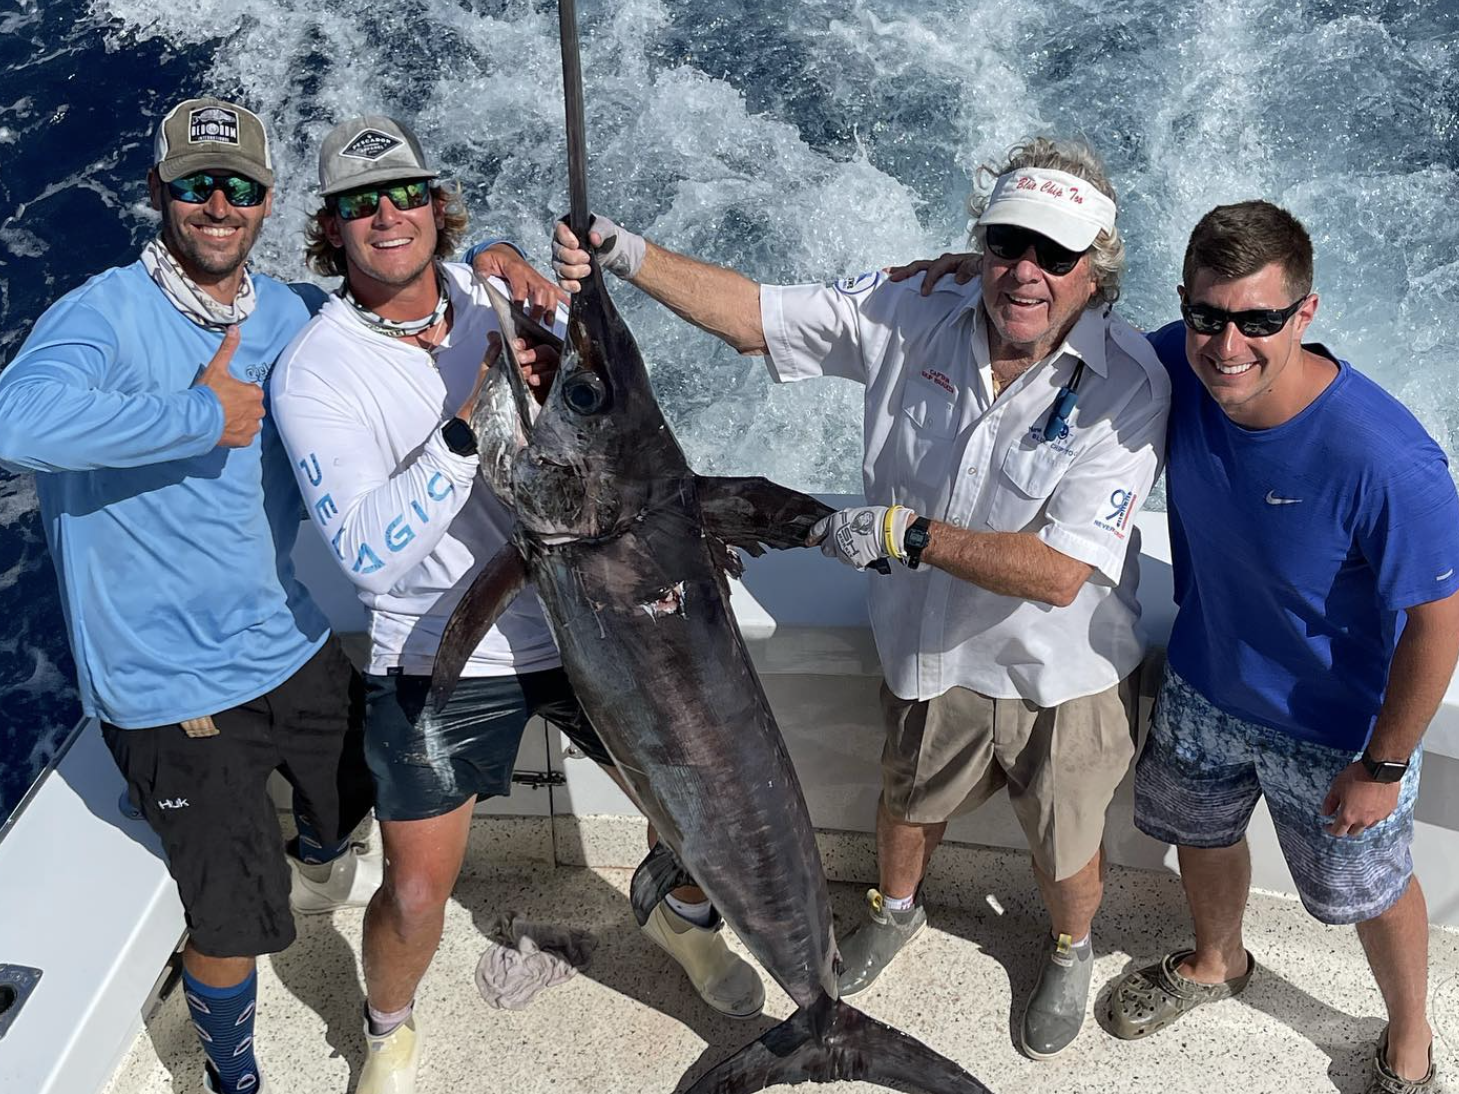 Group of four guys holding swordfish after a successful swordfish charter in Fort Lauderdale, Florida, with the sun and ocean in the background, capturing the excitement and achievement of their fishing adventure.